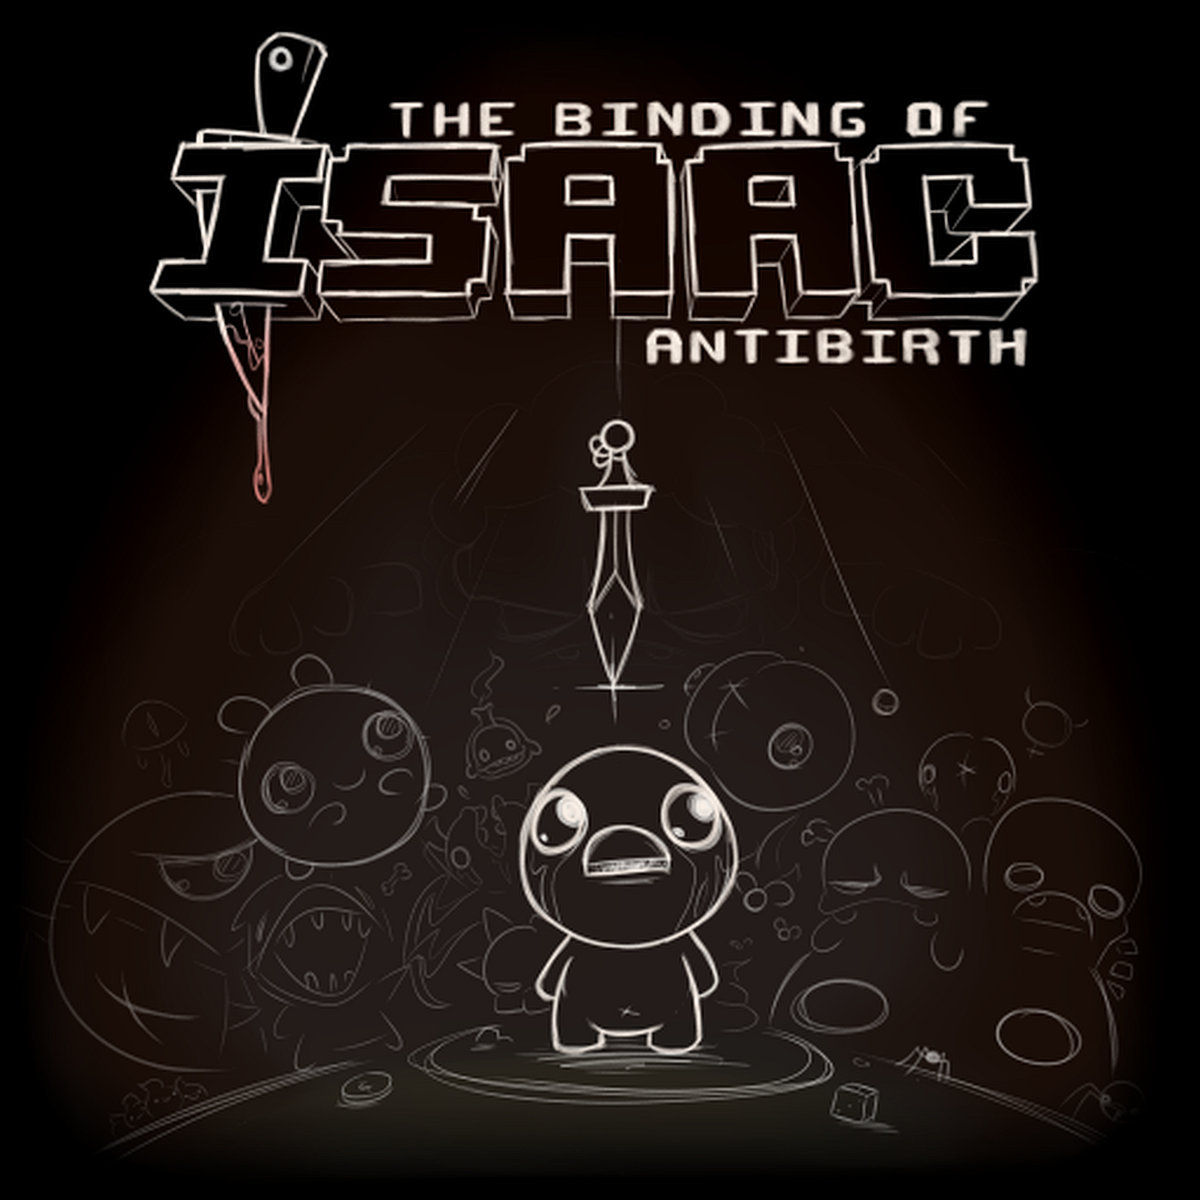 The Binding of Isaac: Antibirth - Forgotten Lullaby